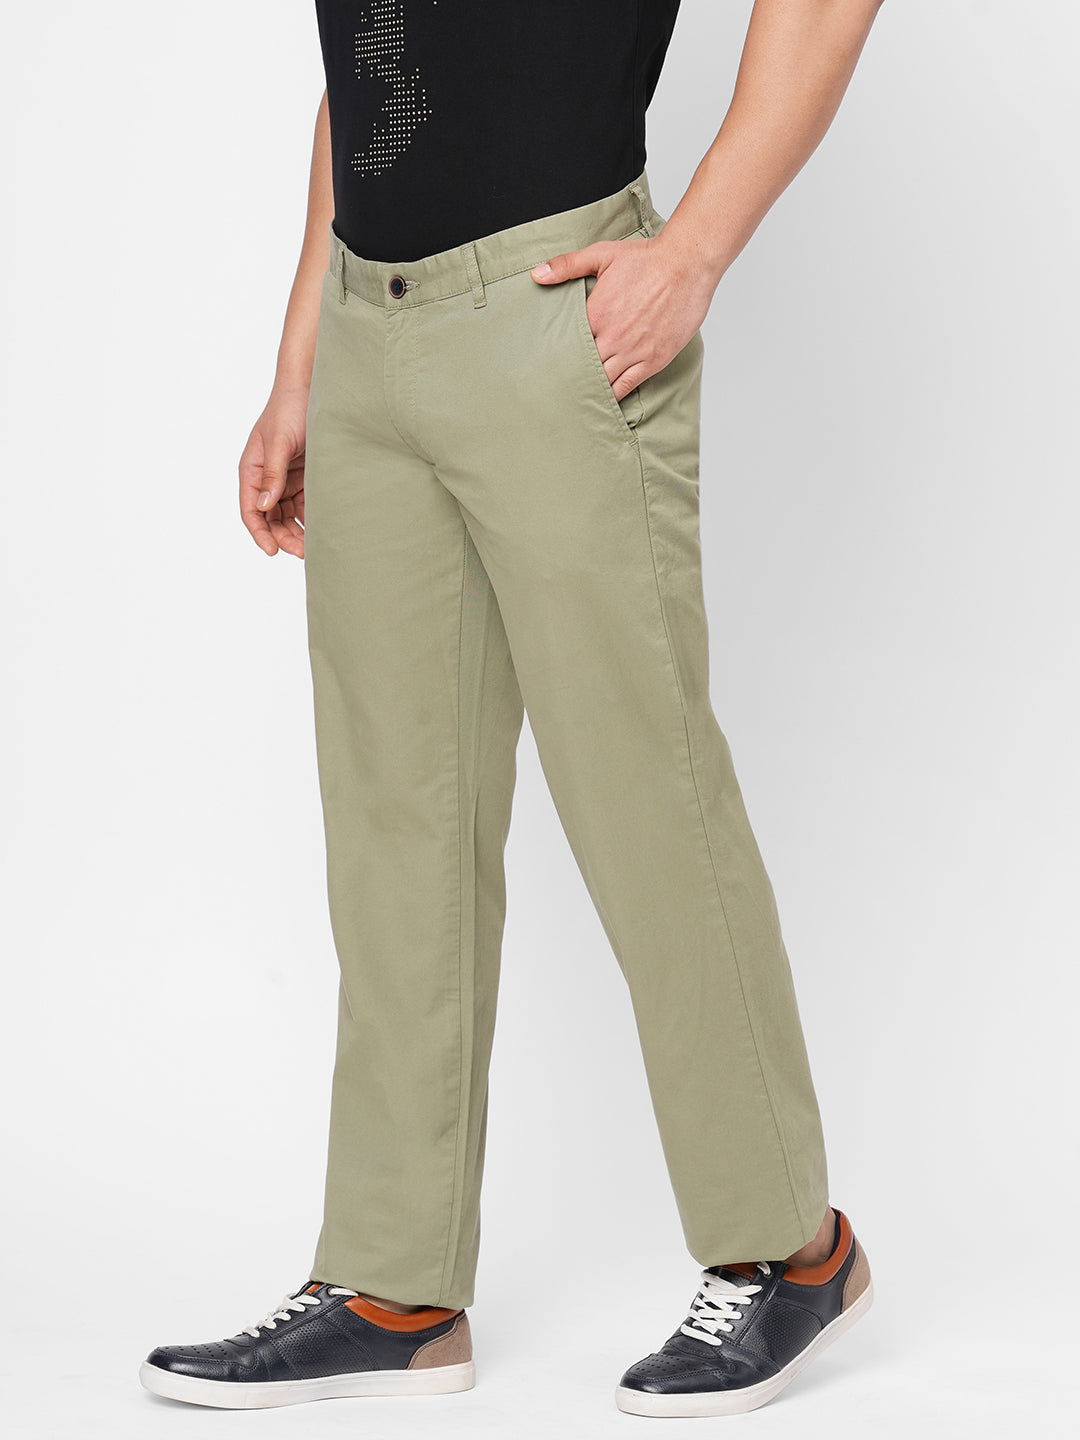 Top Brands Trousers - Buy Top Brands Trousers online in India